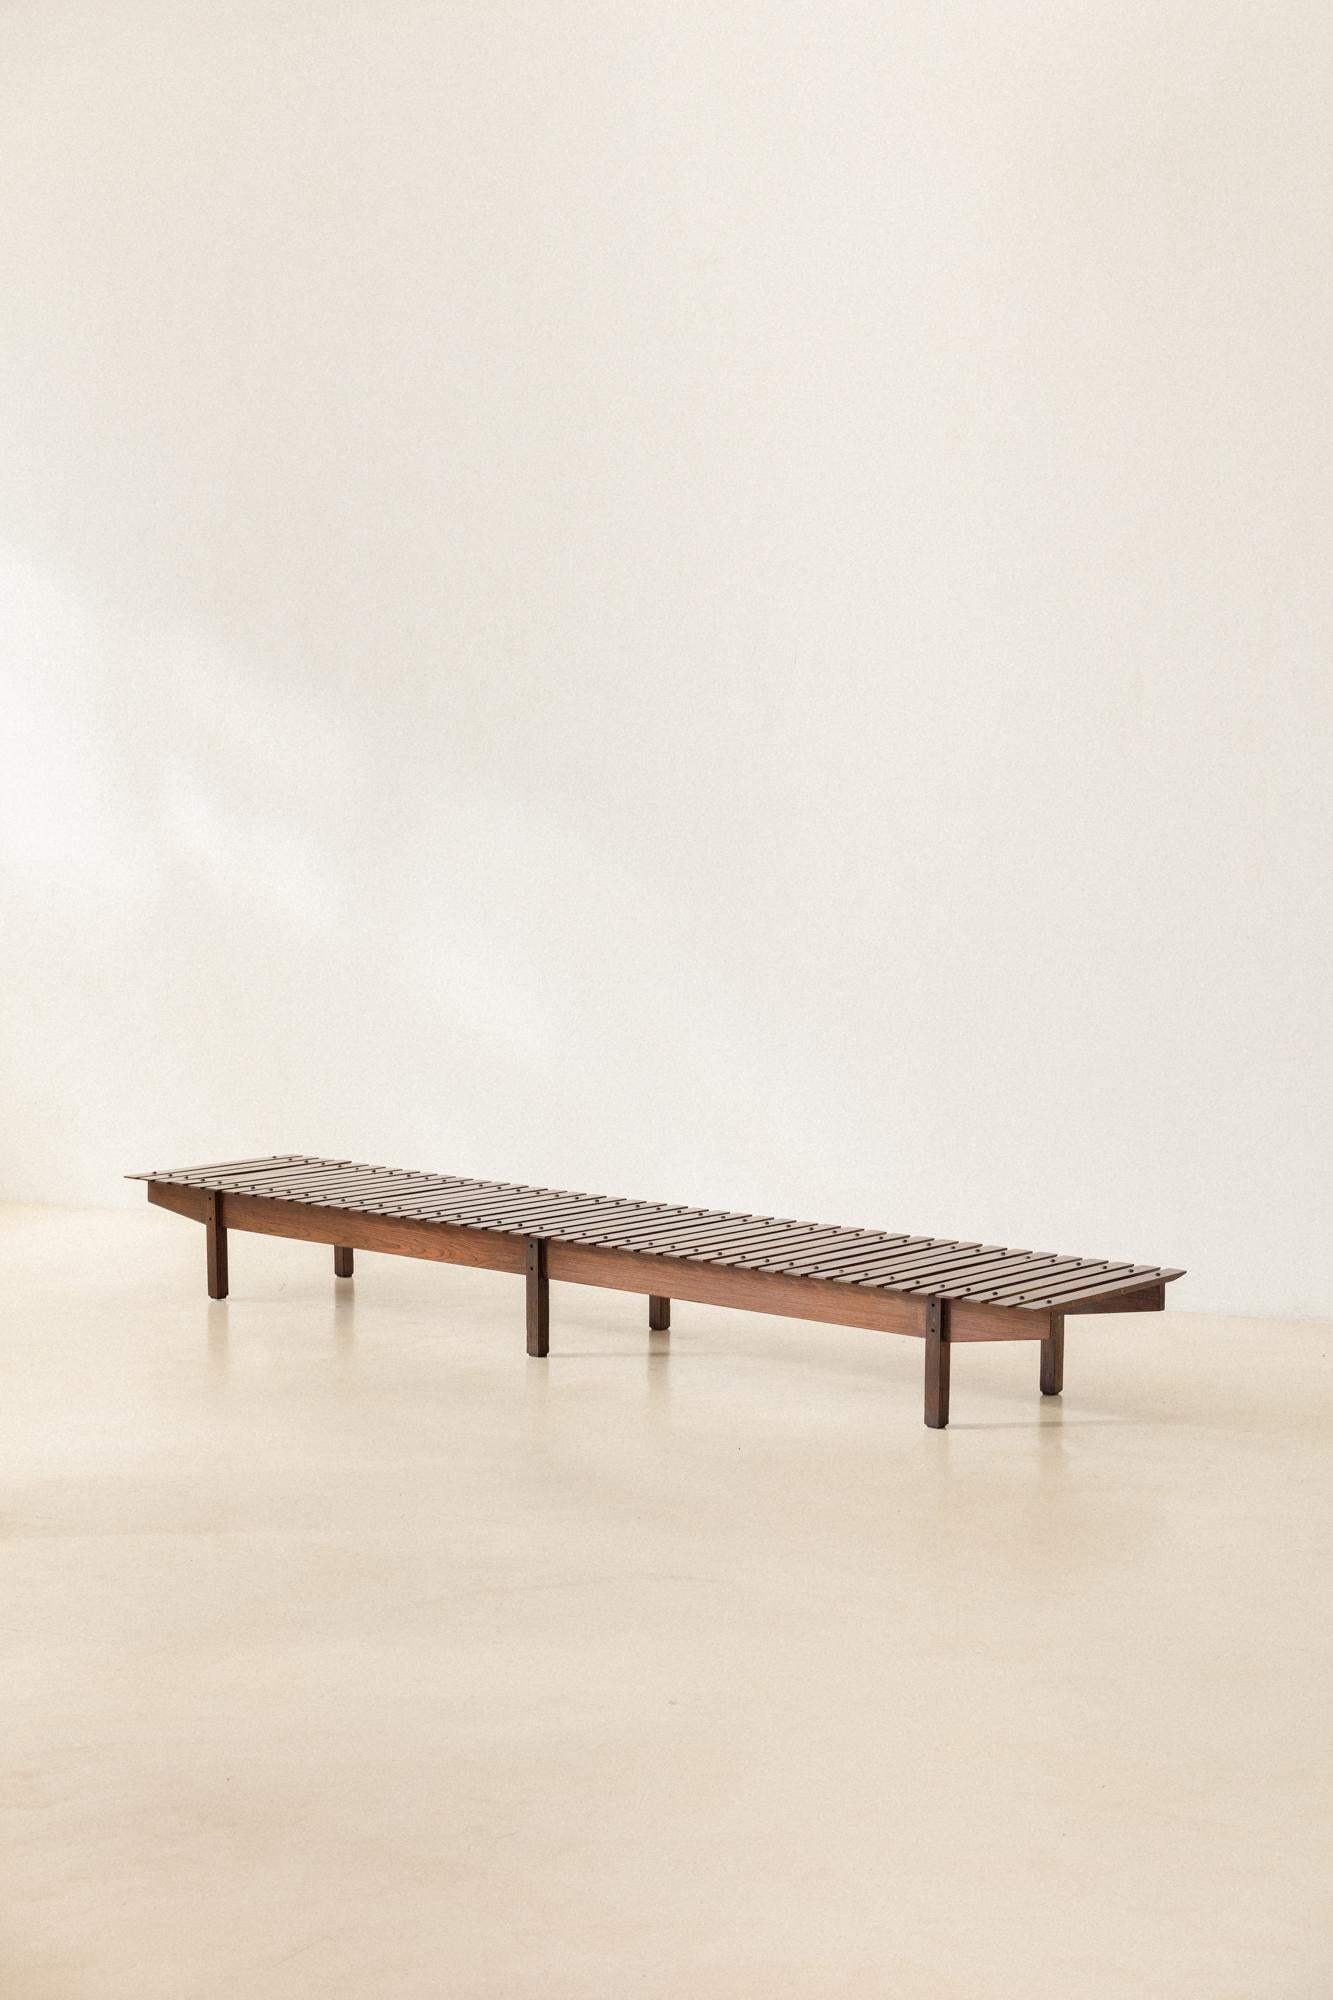 Designed in 1958 by Sergio Rodrigues (1927-2014) and manufactured by Oca, the Mucki bench is an incredible and versatile piece – ideal for different kinds of ambiances, indoor and outdoor. 

The Mucki bench is composed of a low and well-structured